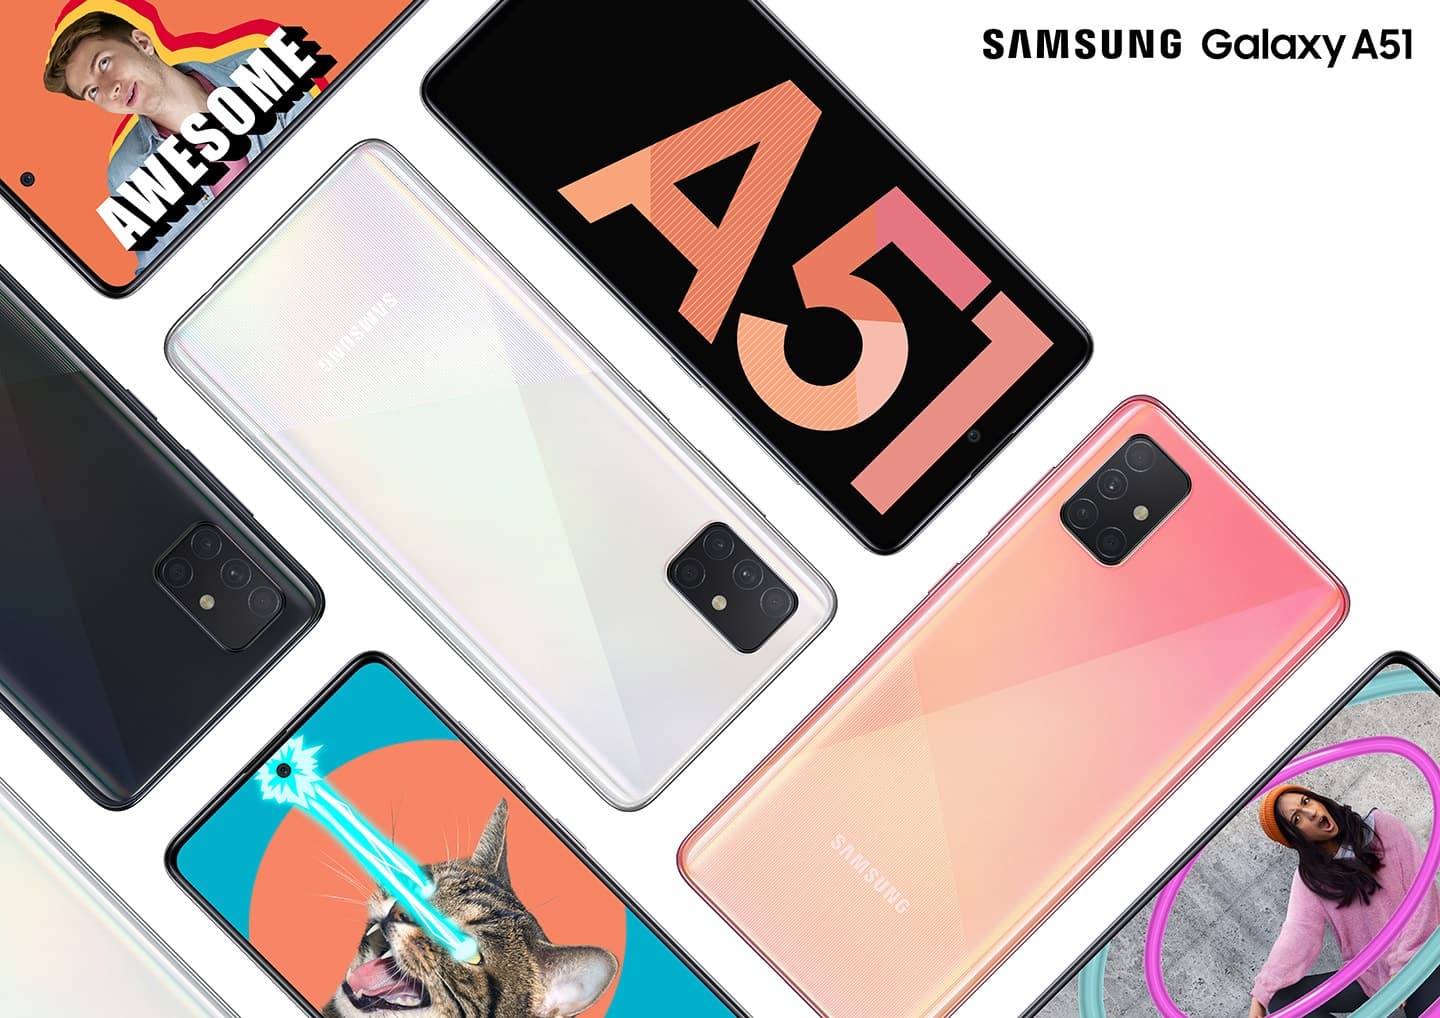 Samsung Galaxy A51 in four different color finishes